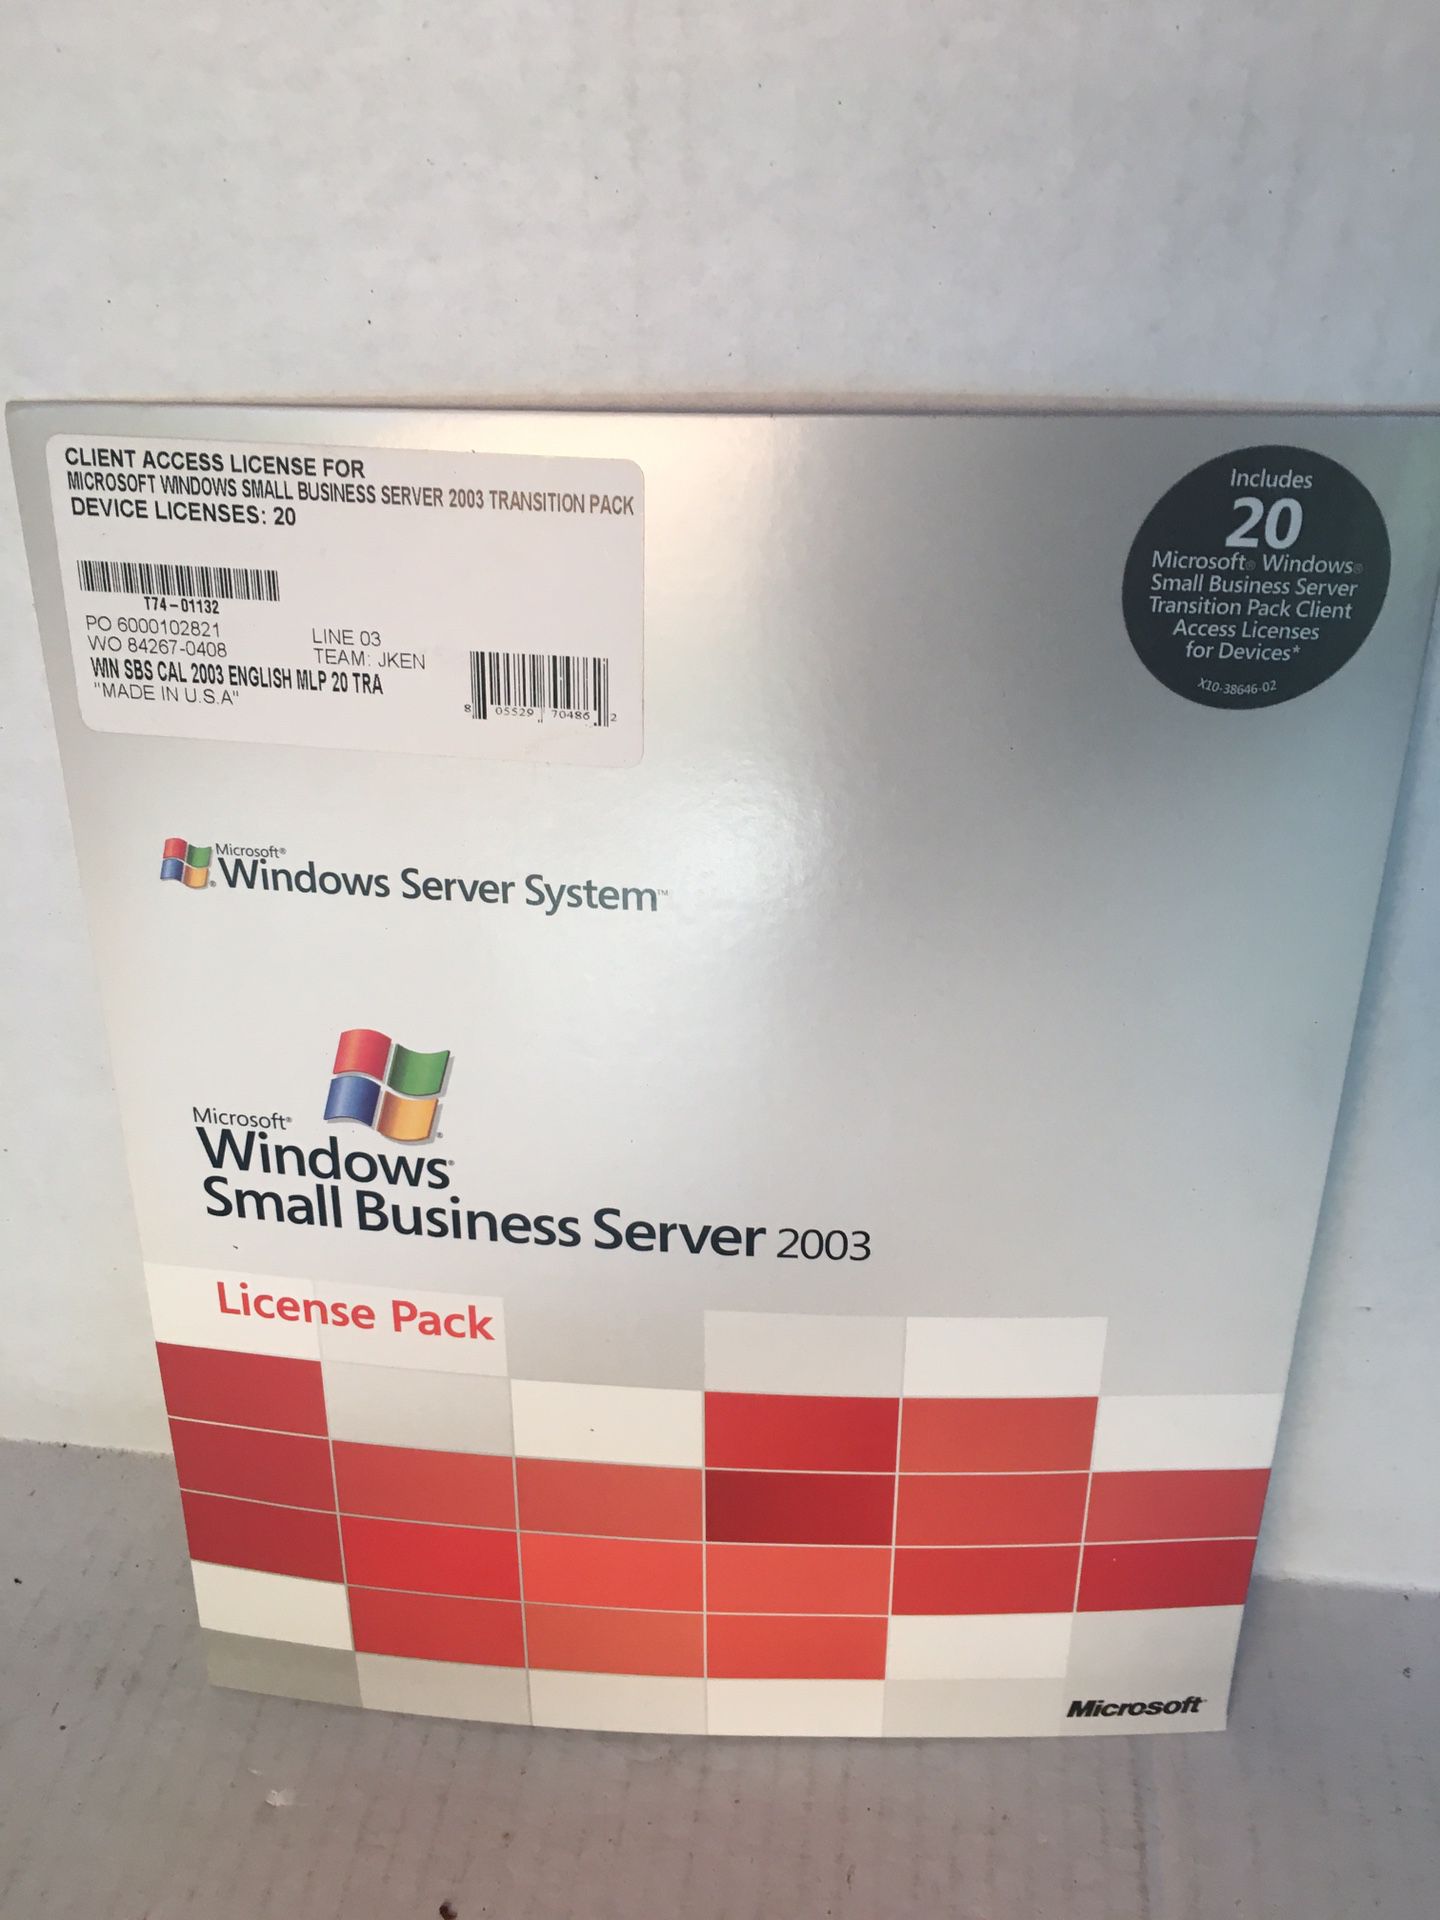 Microsoft Windows Small Business Server 2003 with 20 Device Licenses